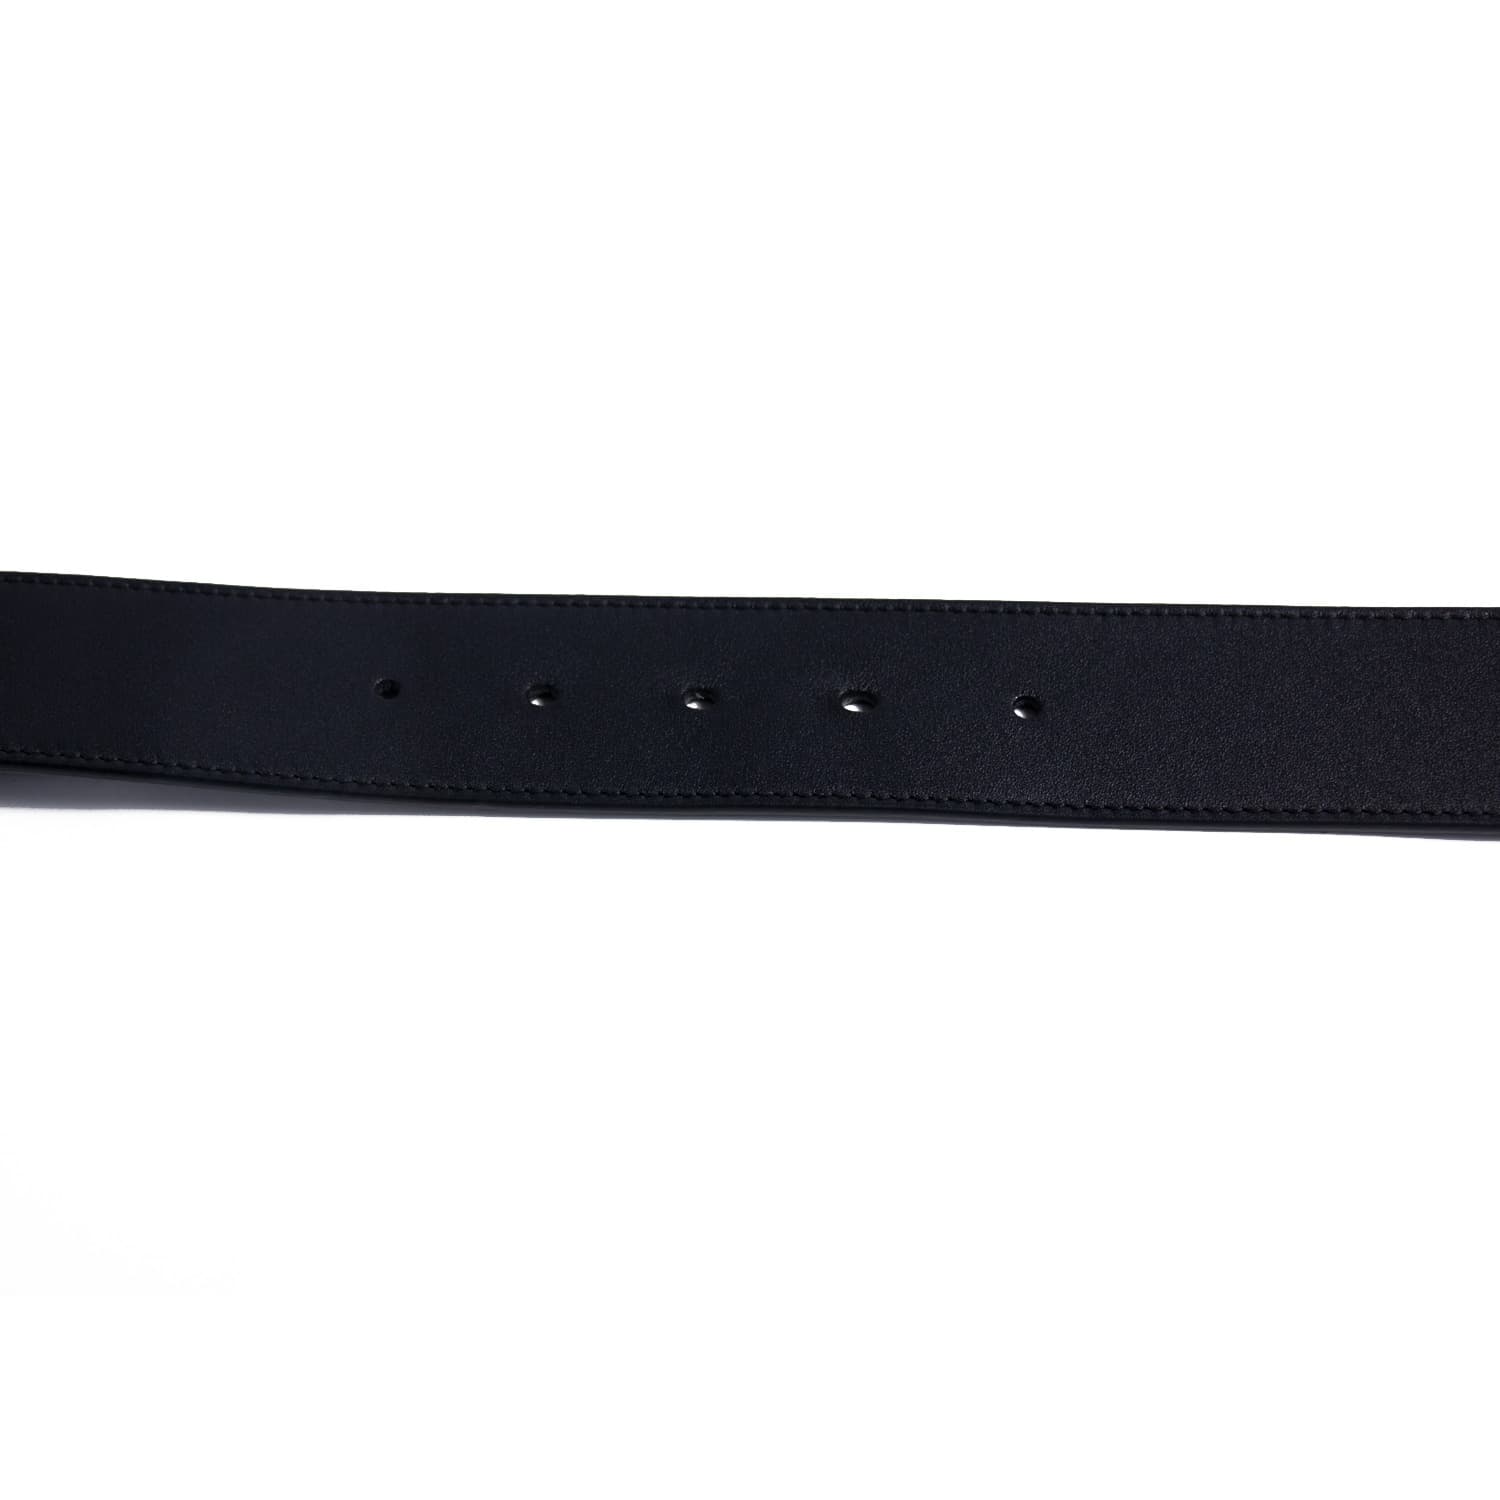 Shop authentic Gucci GG Marmont Pearl Leather Belt at revogue for just ...